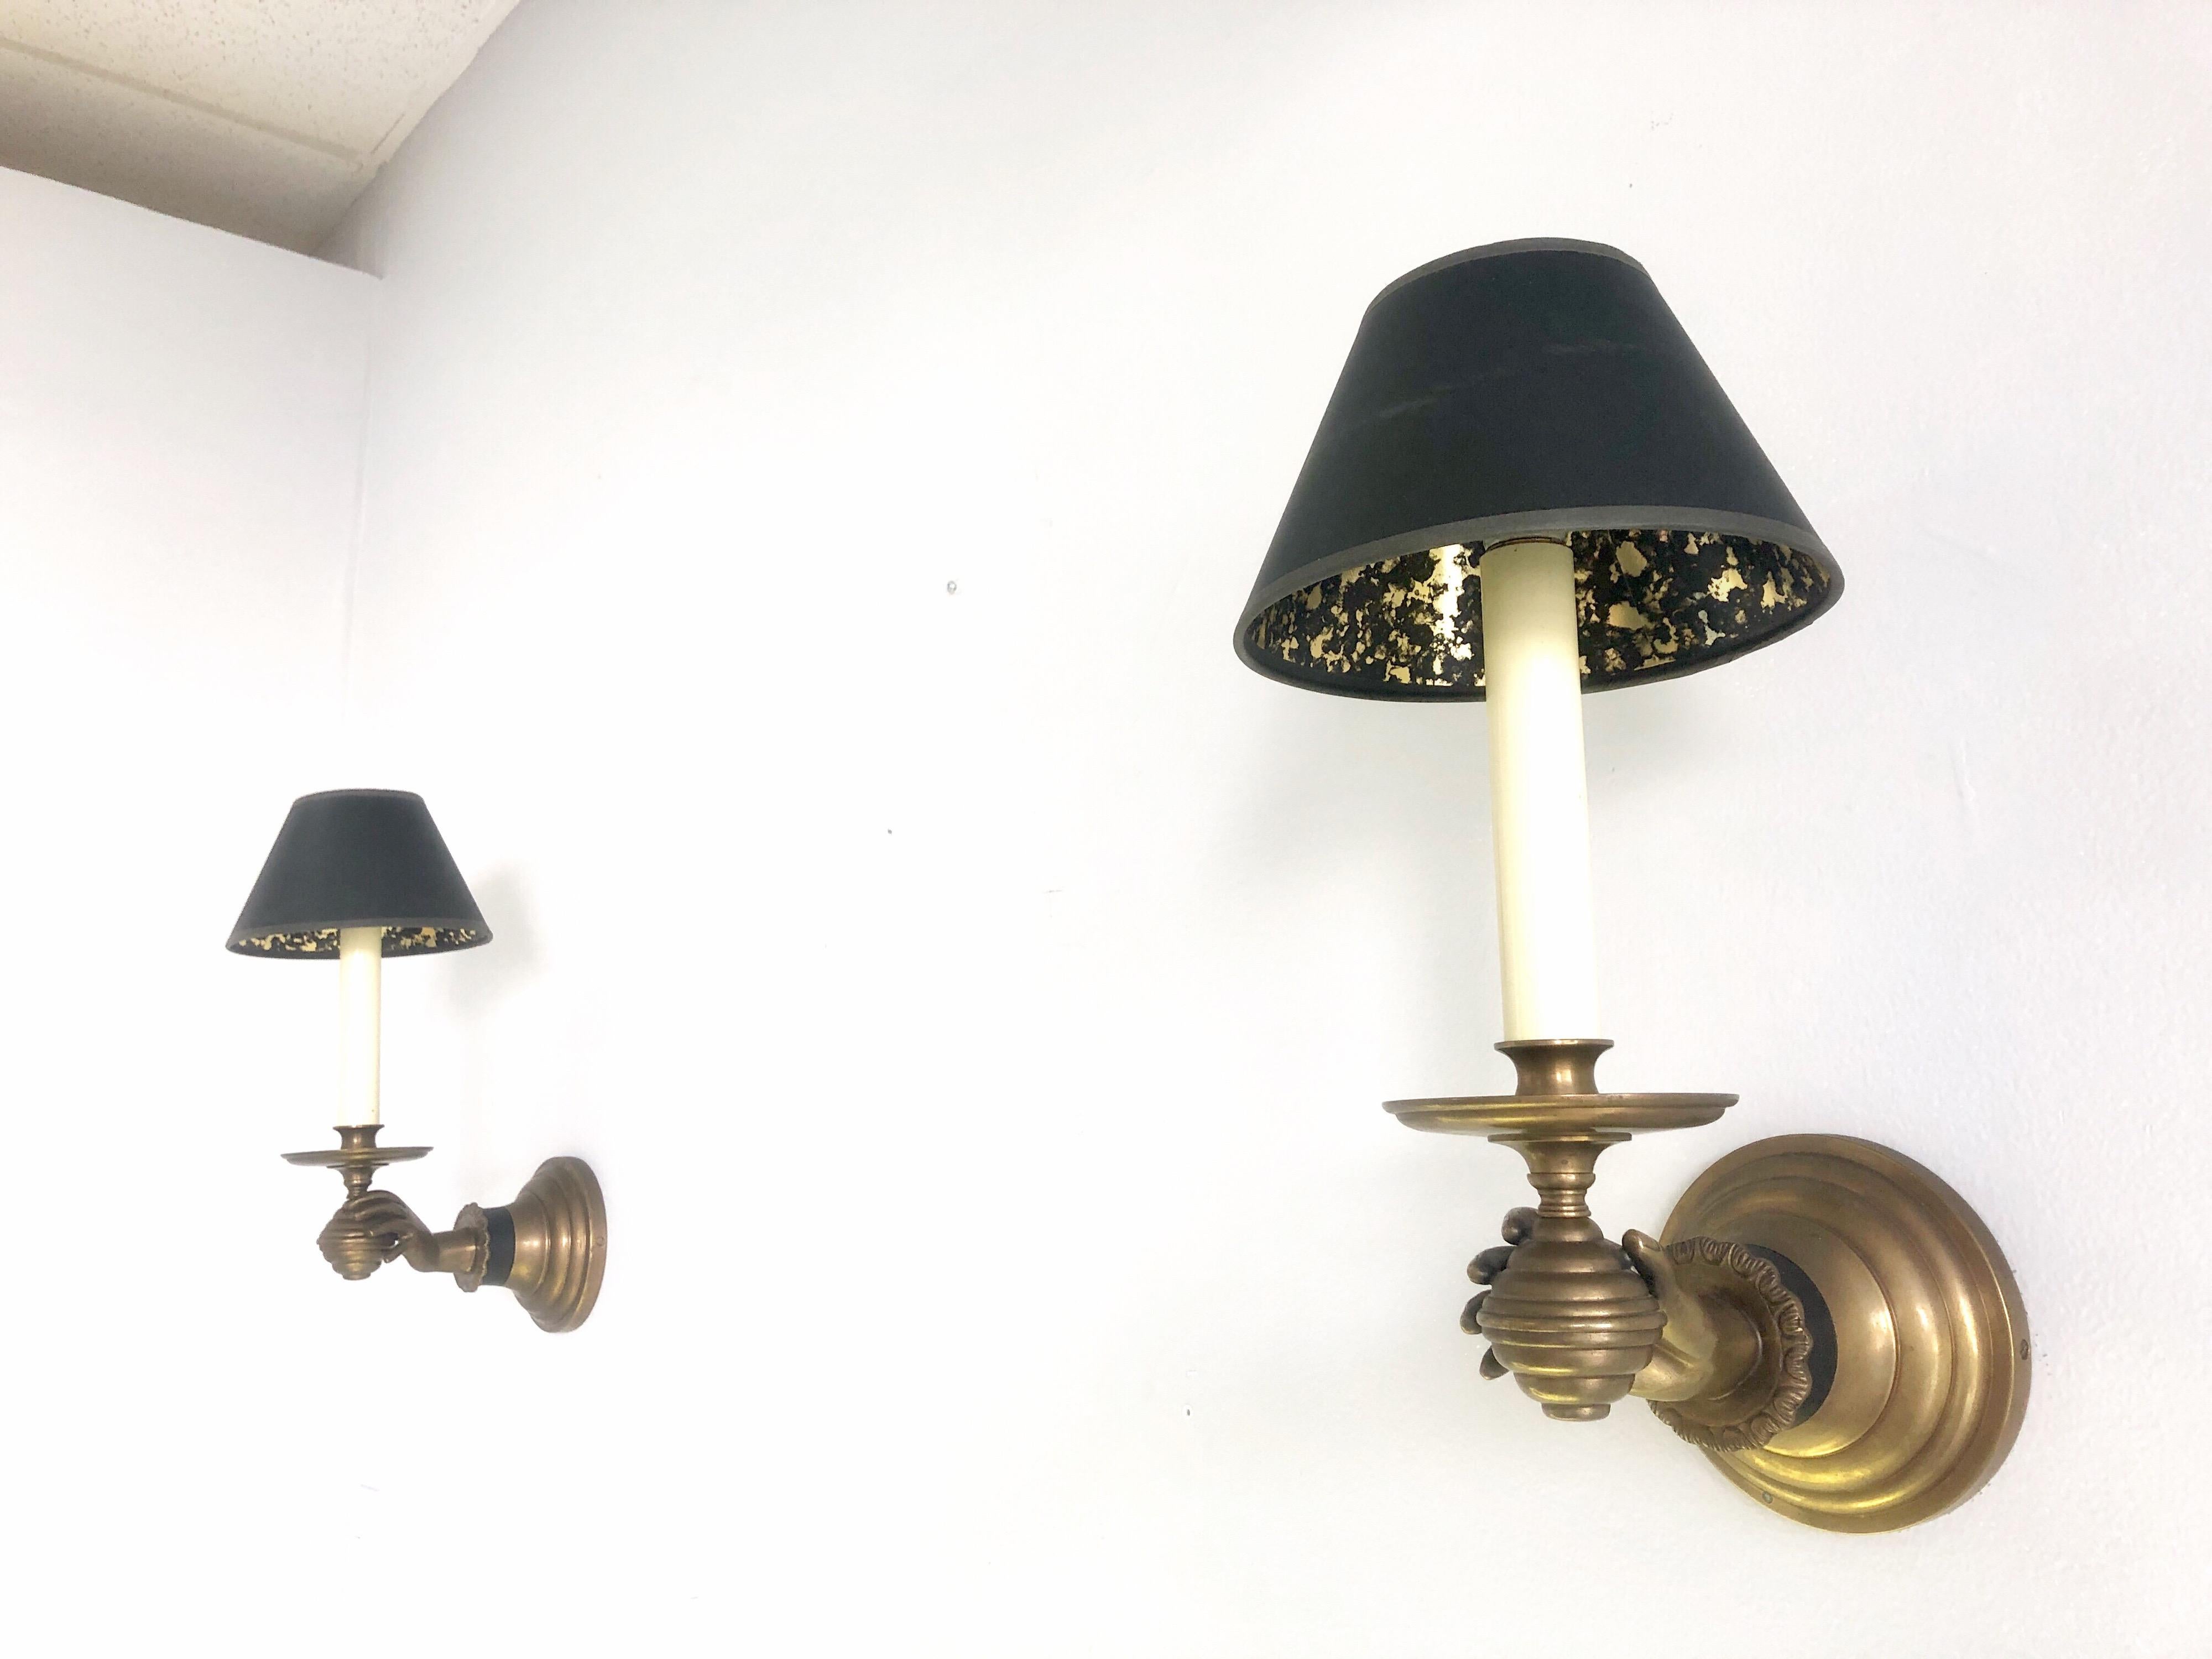 A true pair of brass sconces, a graceful hand holding the light source. Retain vintage black shades. In working order.